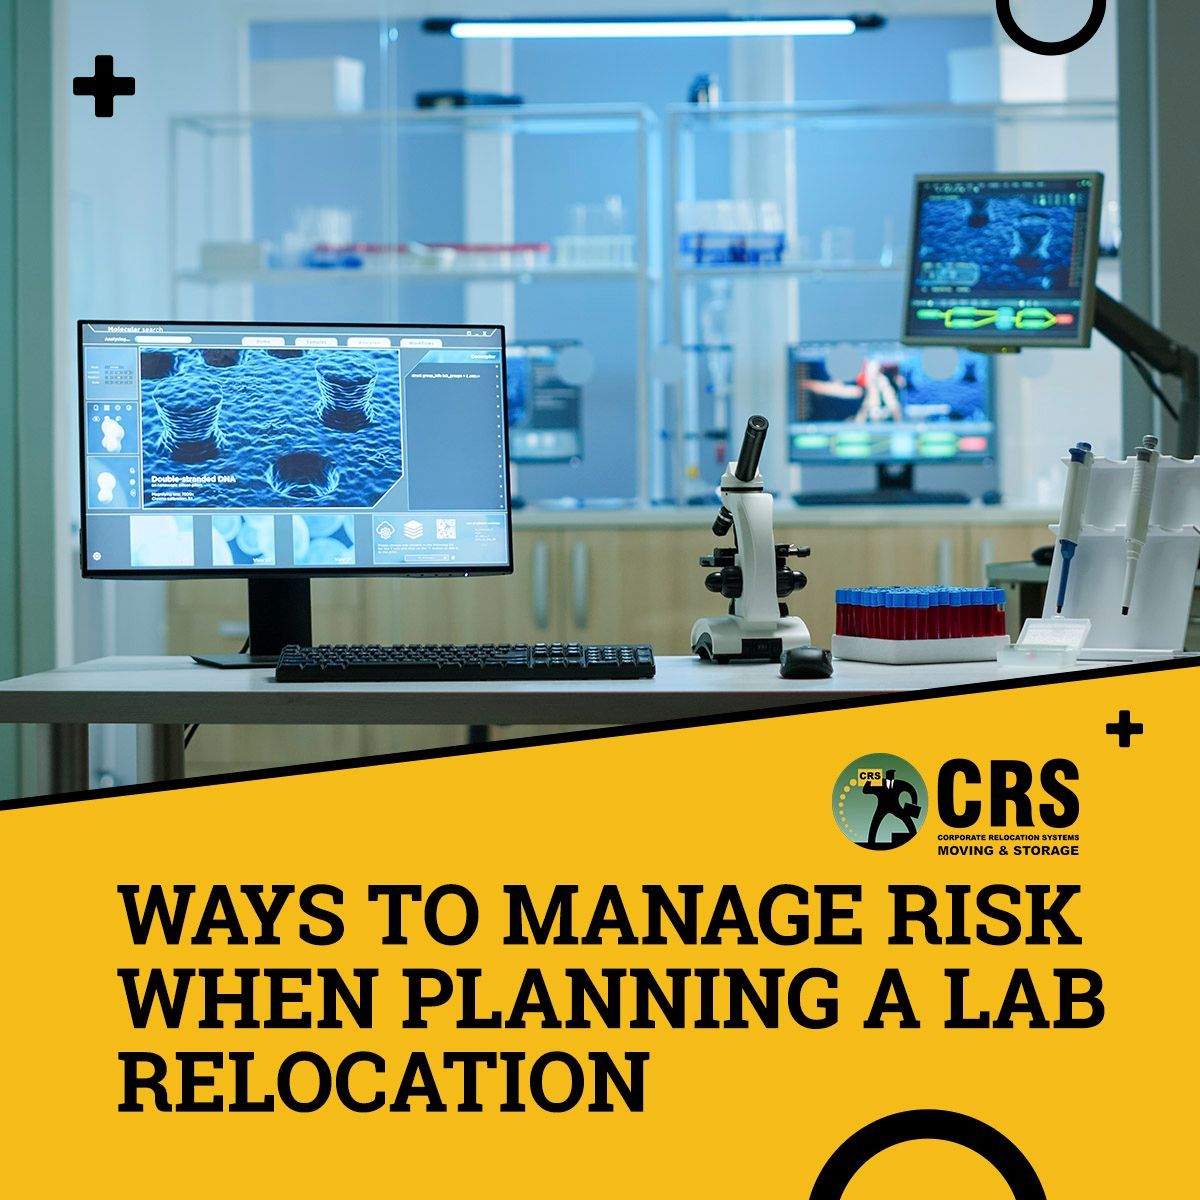 Labs often have fragile and expensive equipment, so managing risks during moves can be challenging🔬🧫📦  Get some tips on our blog: buff.ly/4bV5gOF 

#OfficeLiquidation #OfficeStorage #OfficeMove #NYCMovers #CorporateMovers #NYCBusinessMovers #NYC #BusinessMovers